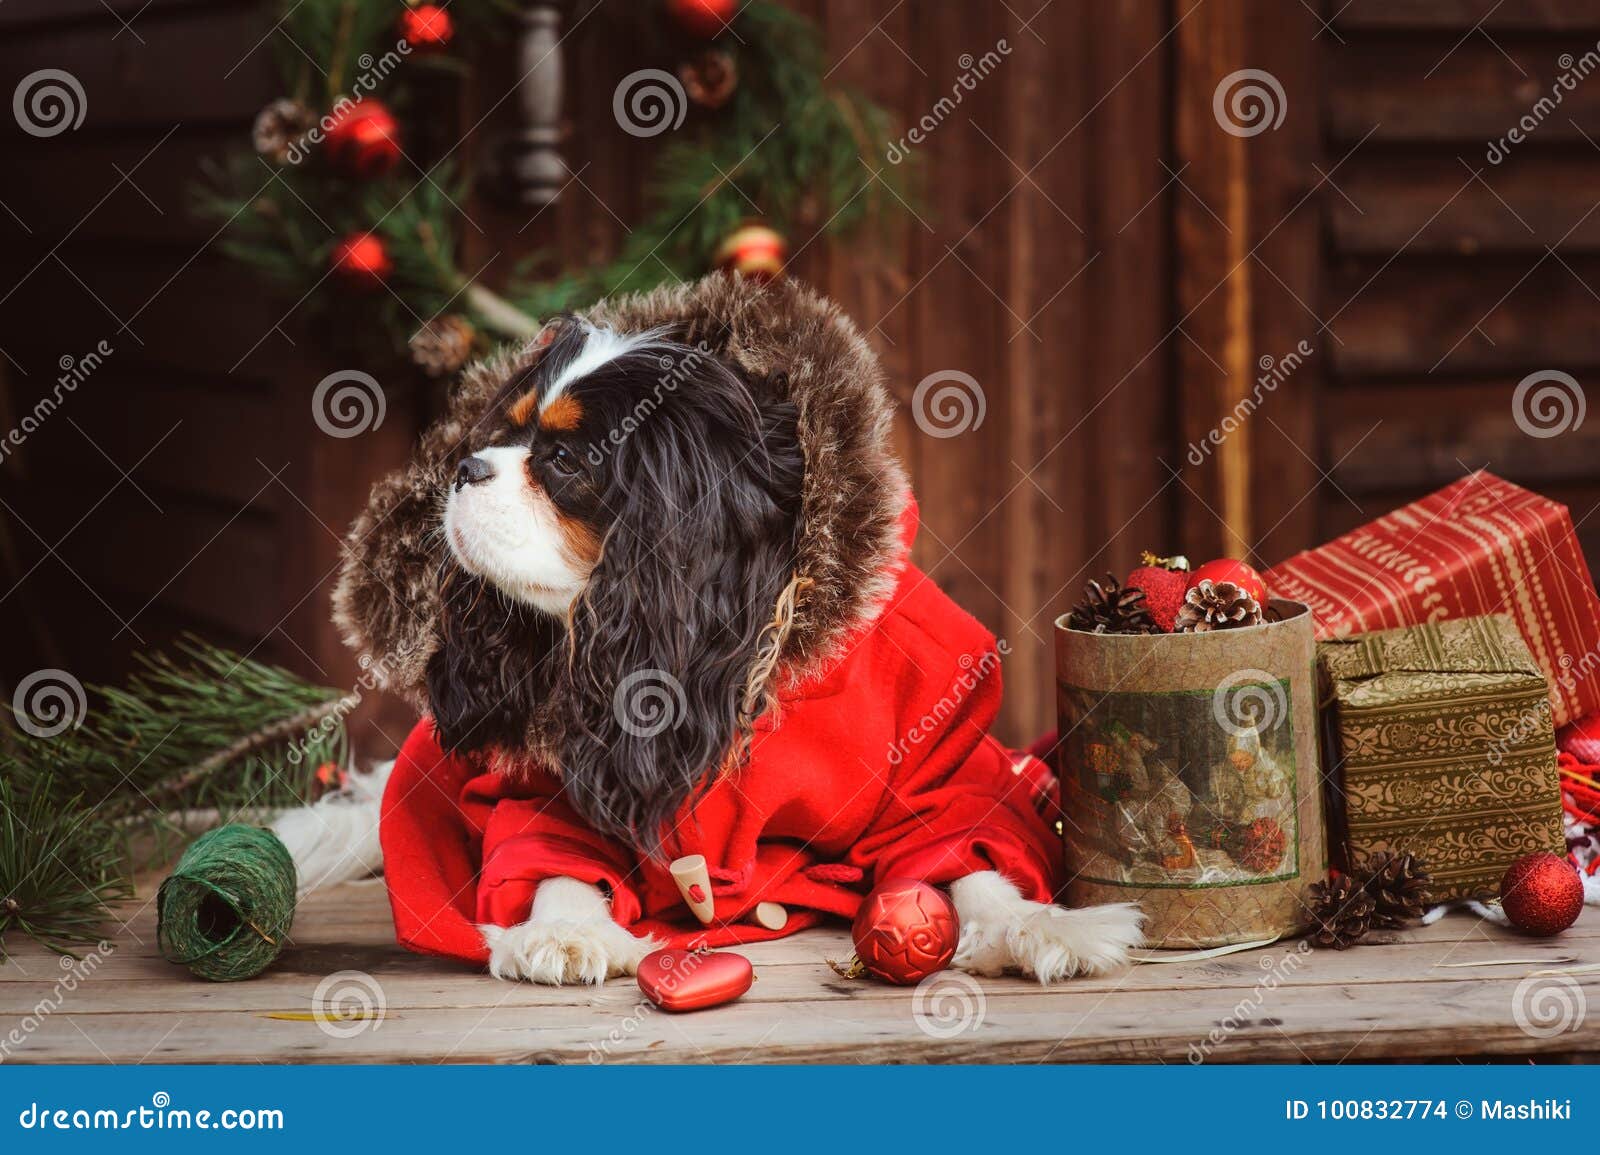 Cute dog celebrating Christmas and New Year with decorations and ts Chinese year of the dog